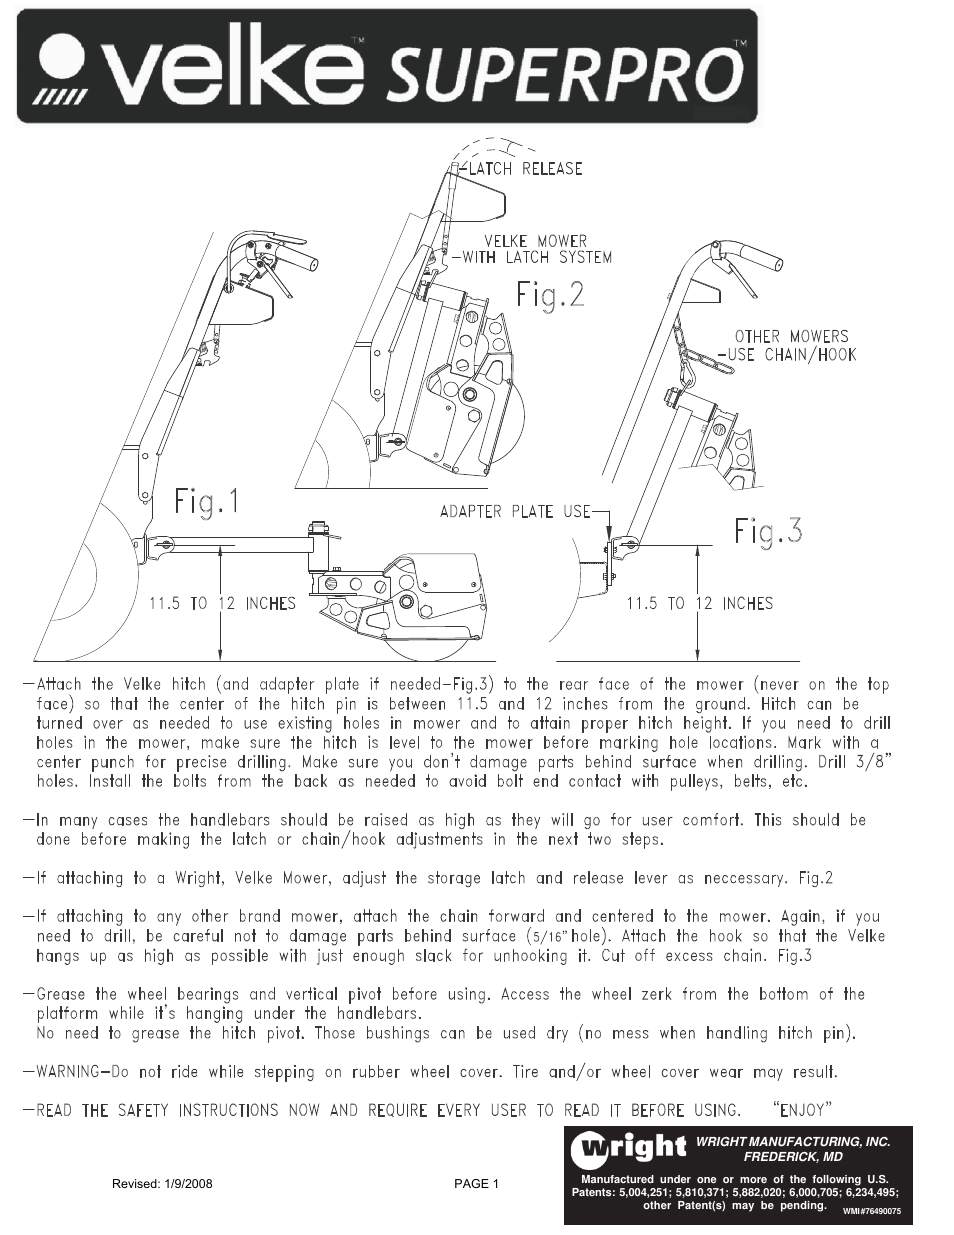 Wright Velke Super Pro User Manual | 6 pages